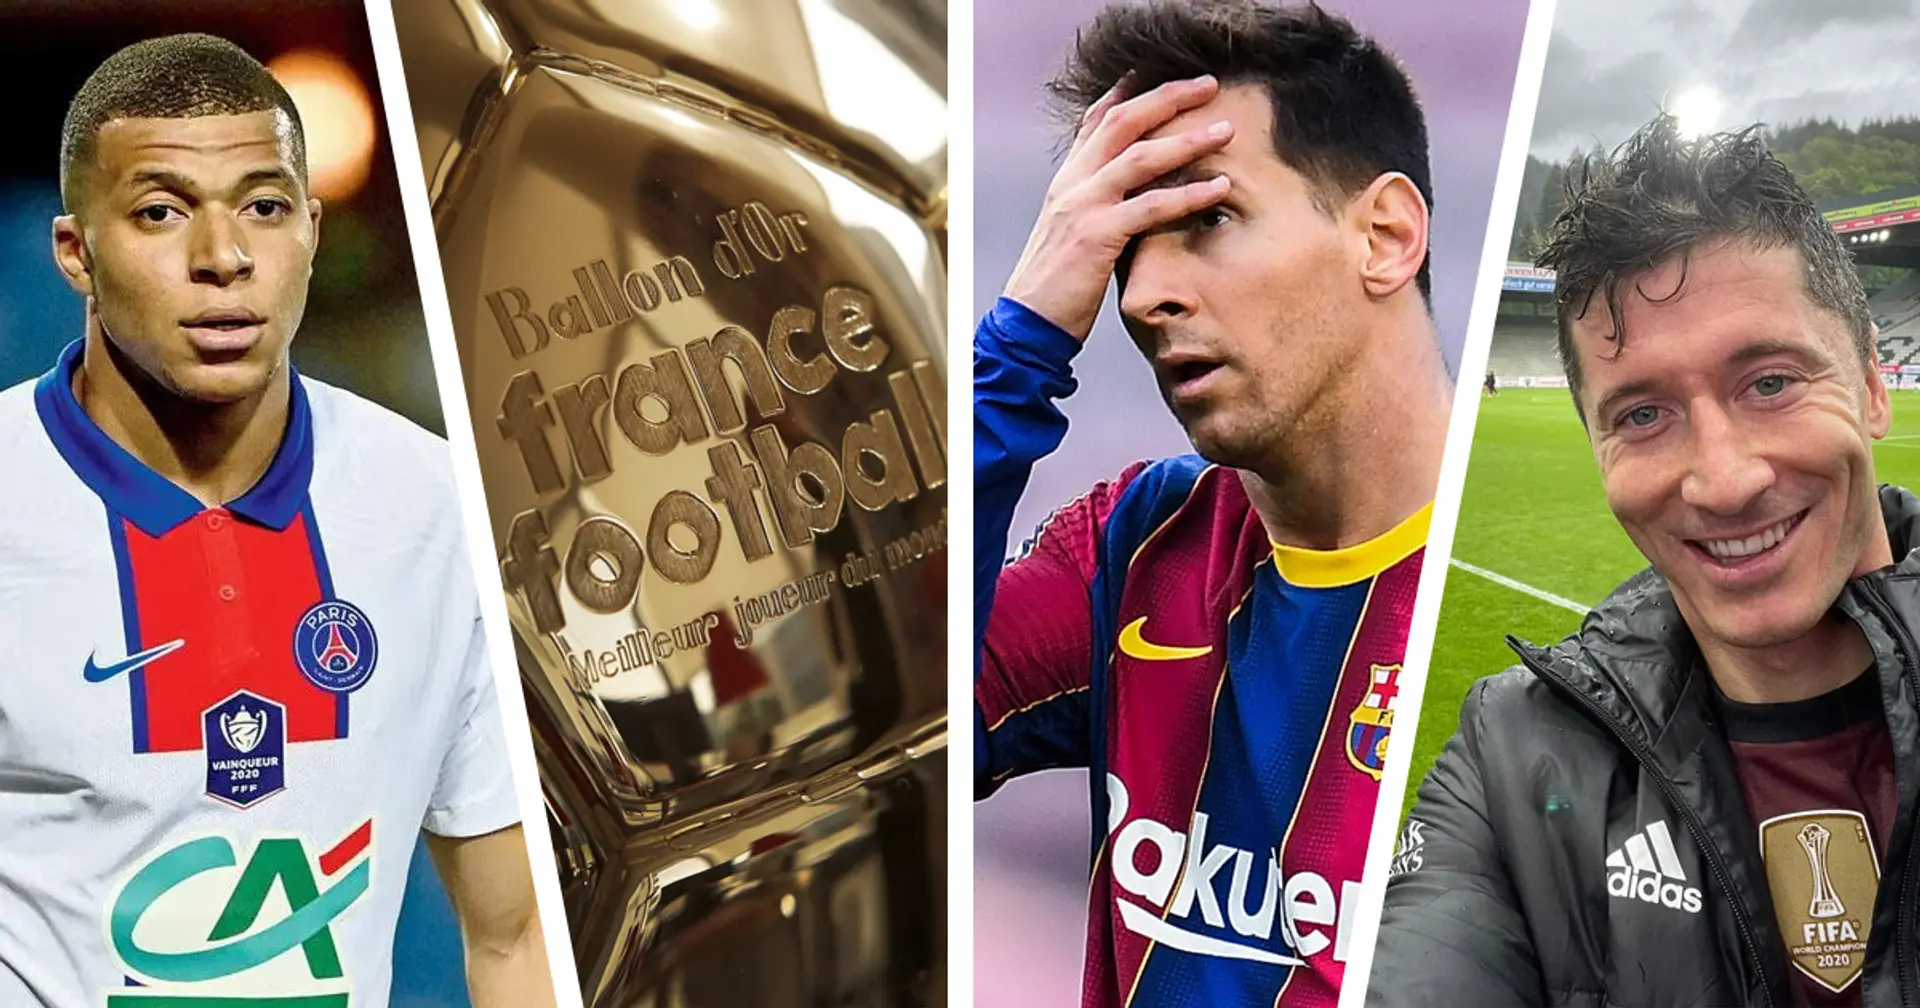 Ballon d'Or power rankings: Messi moves behind Lewandowski after Levante and Celta disasters